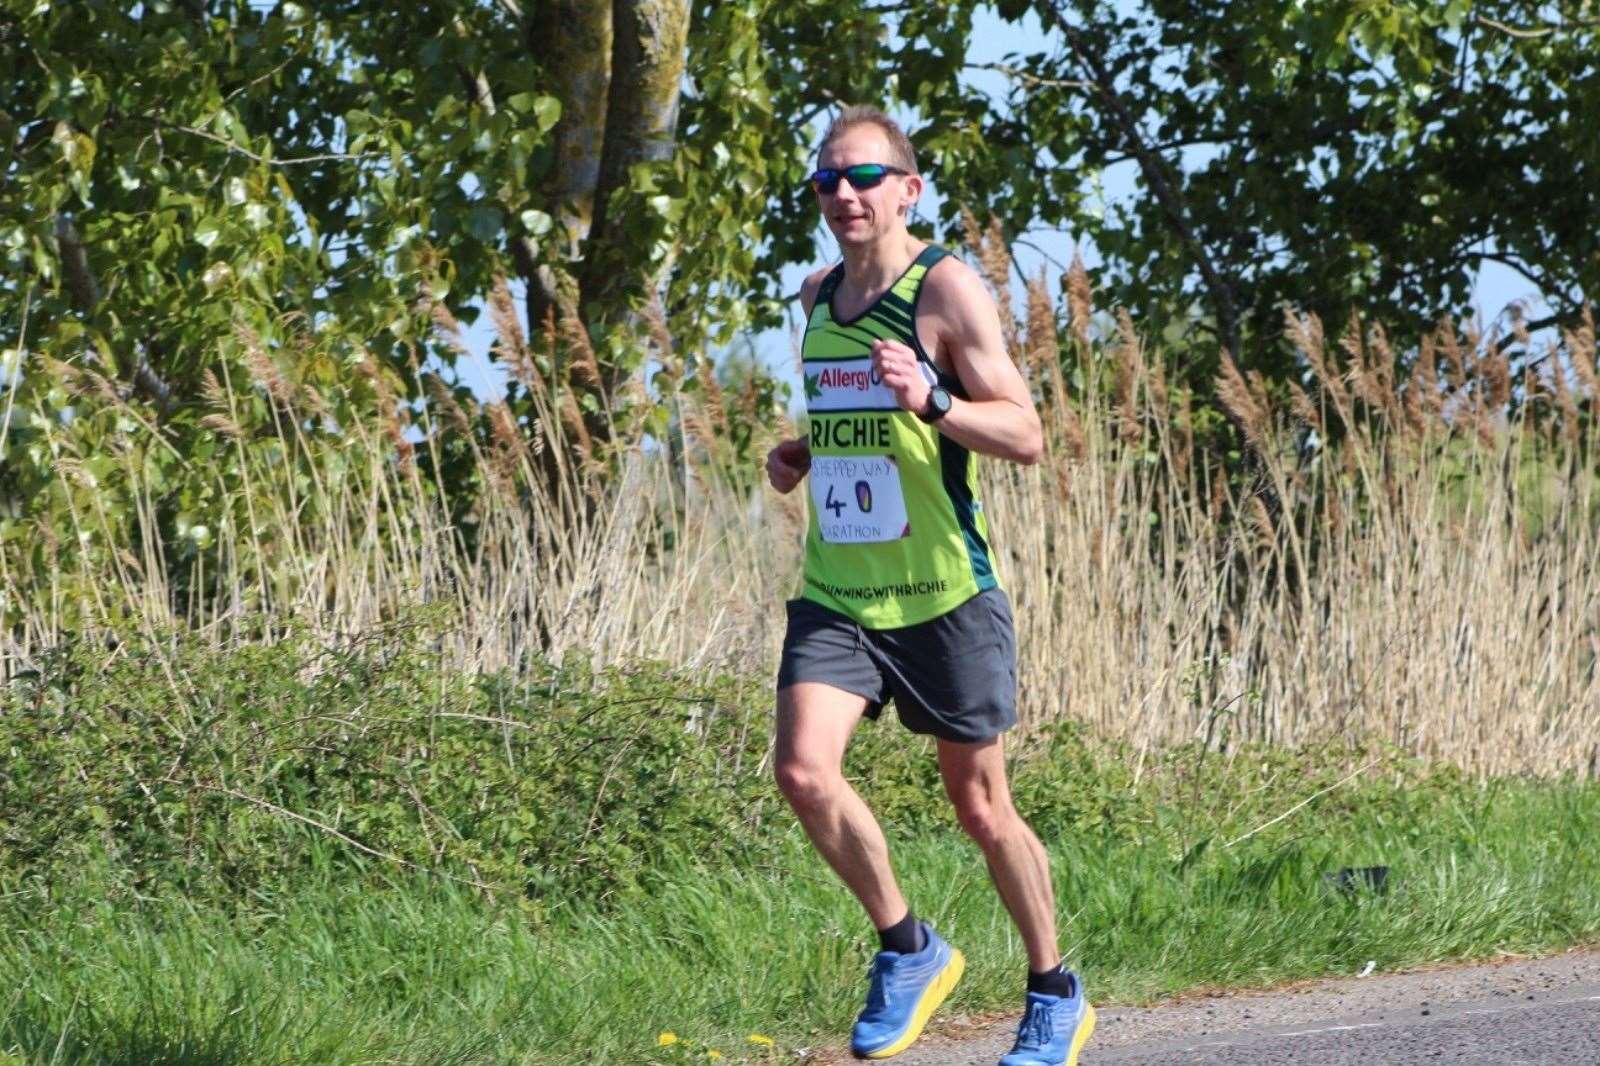 Richard 'Richie' Mills celebrating his 40th birthday by running a marathon along the Sheppey Way at Iwade in aid of Allergy UK